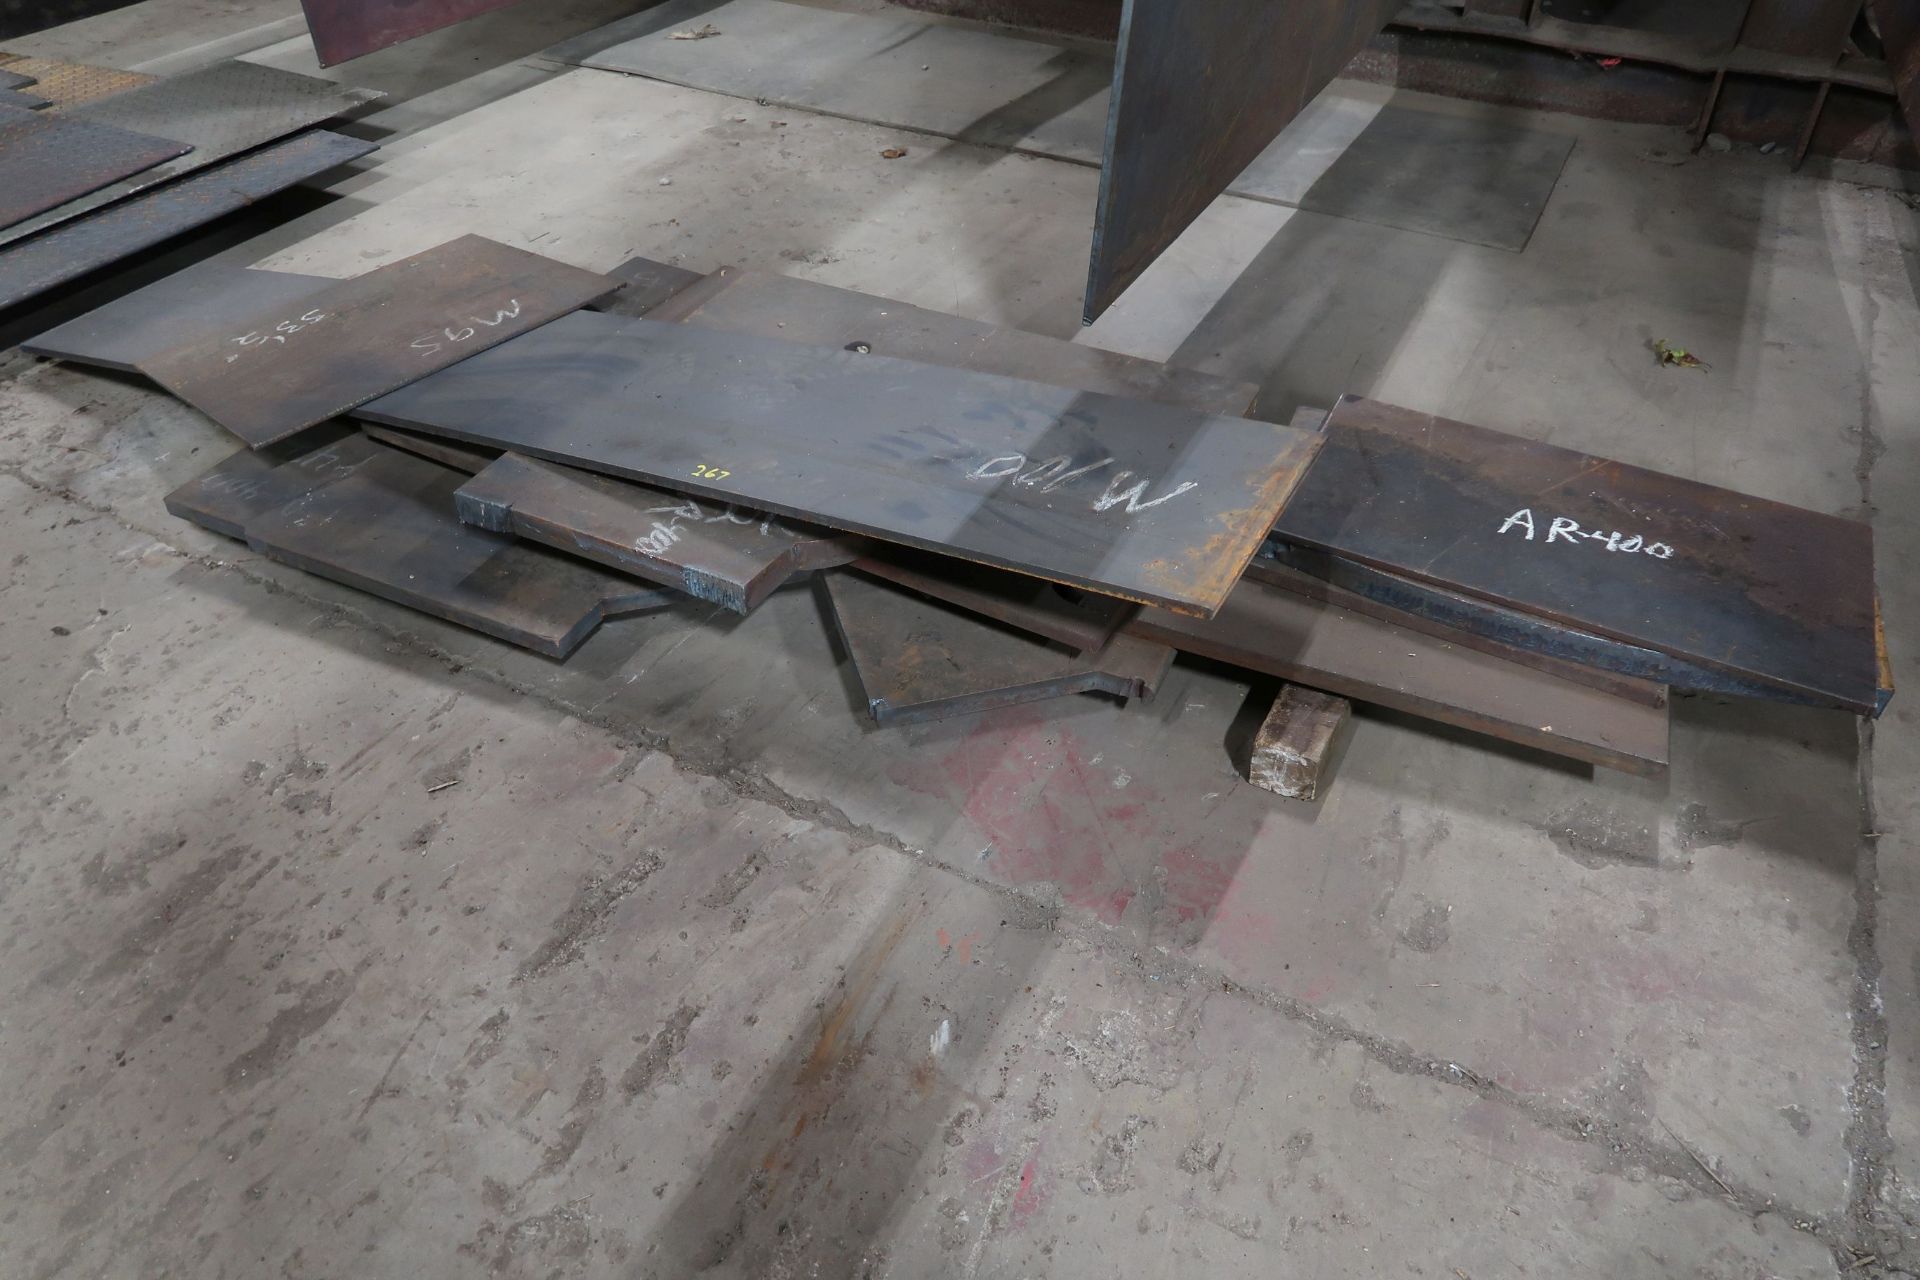 SKID PLATE STEEL STOCK, 1/4" - 3-1/2" THICK - Image 4 of 4